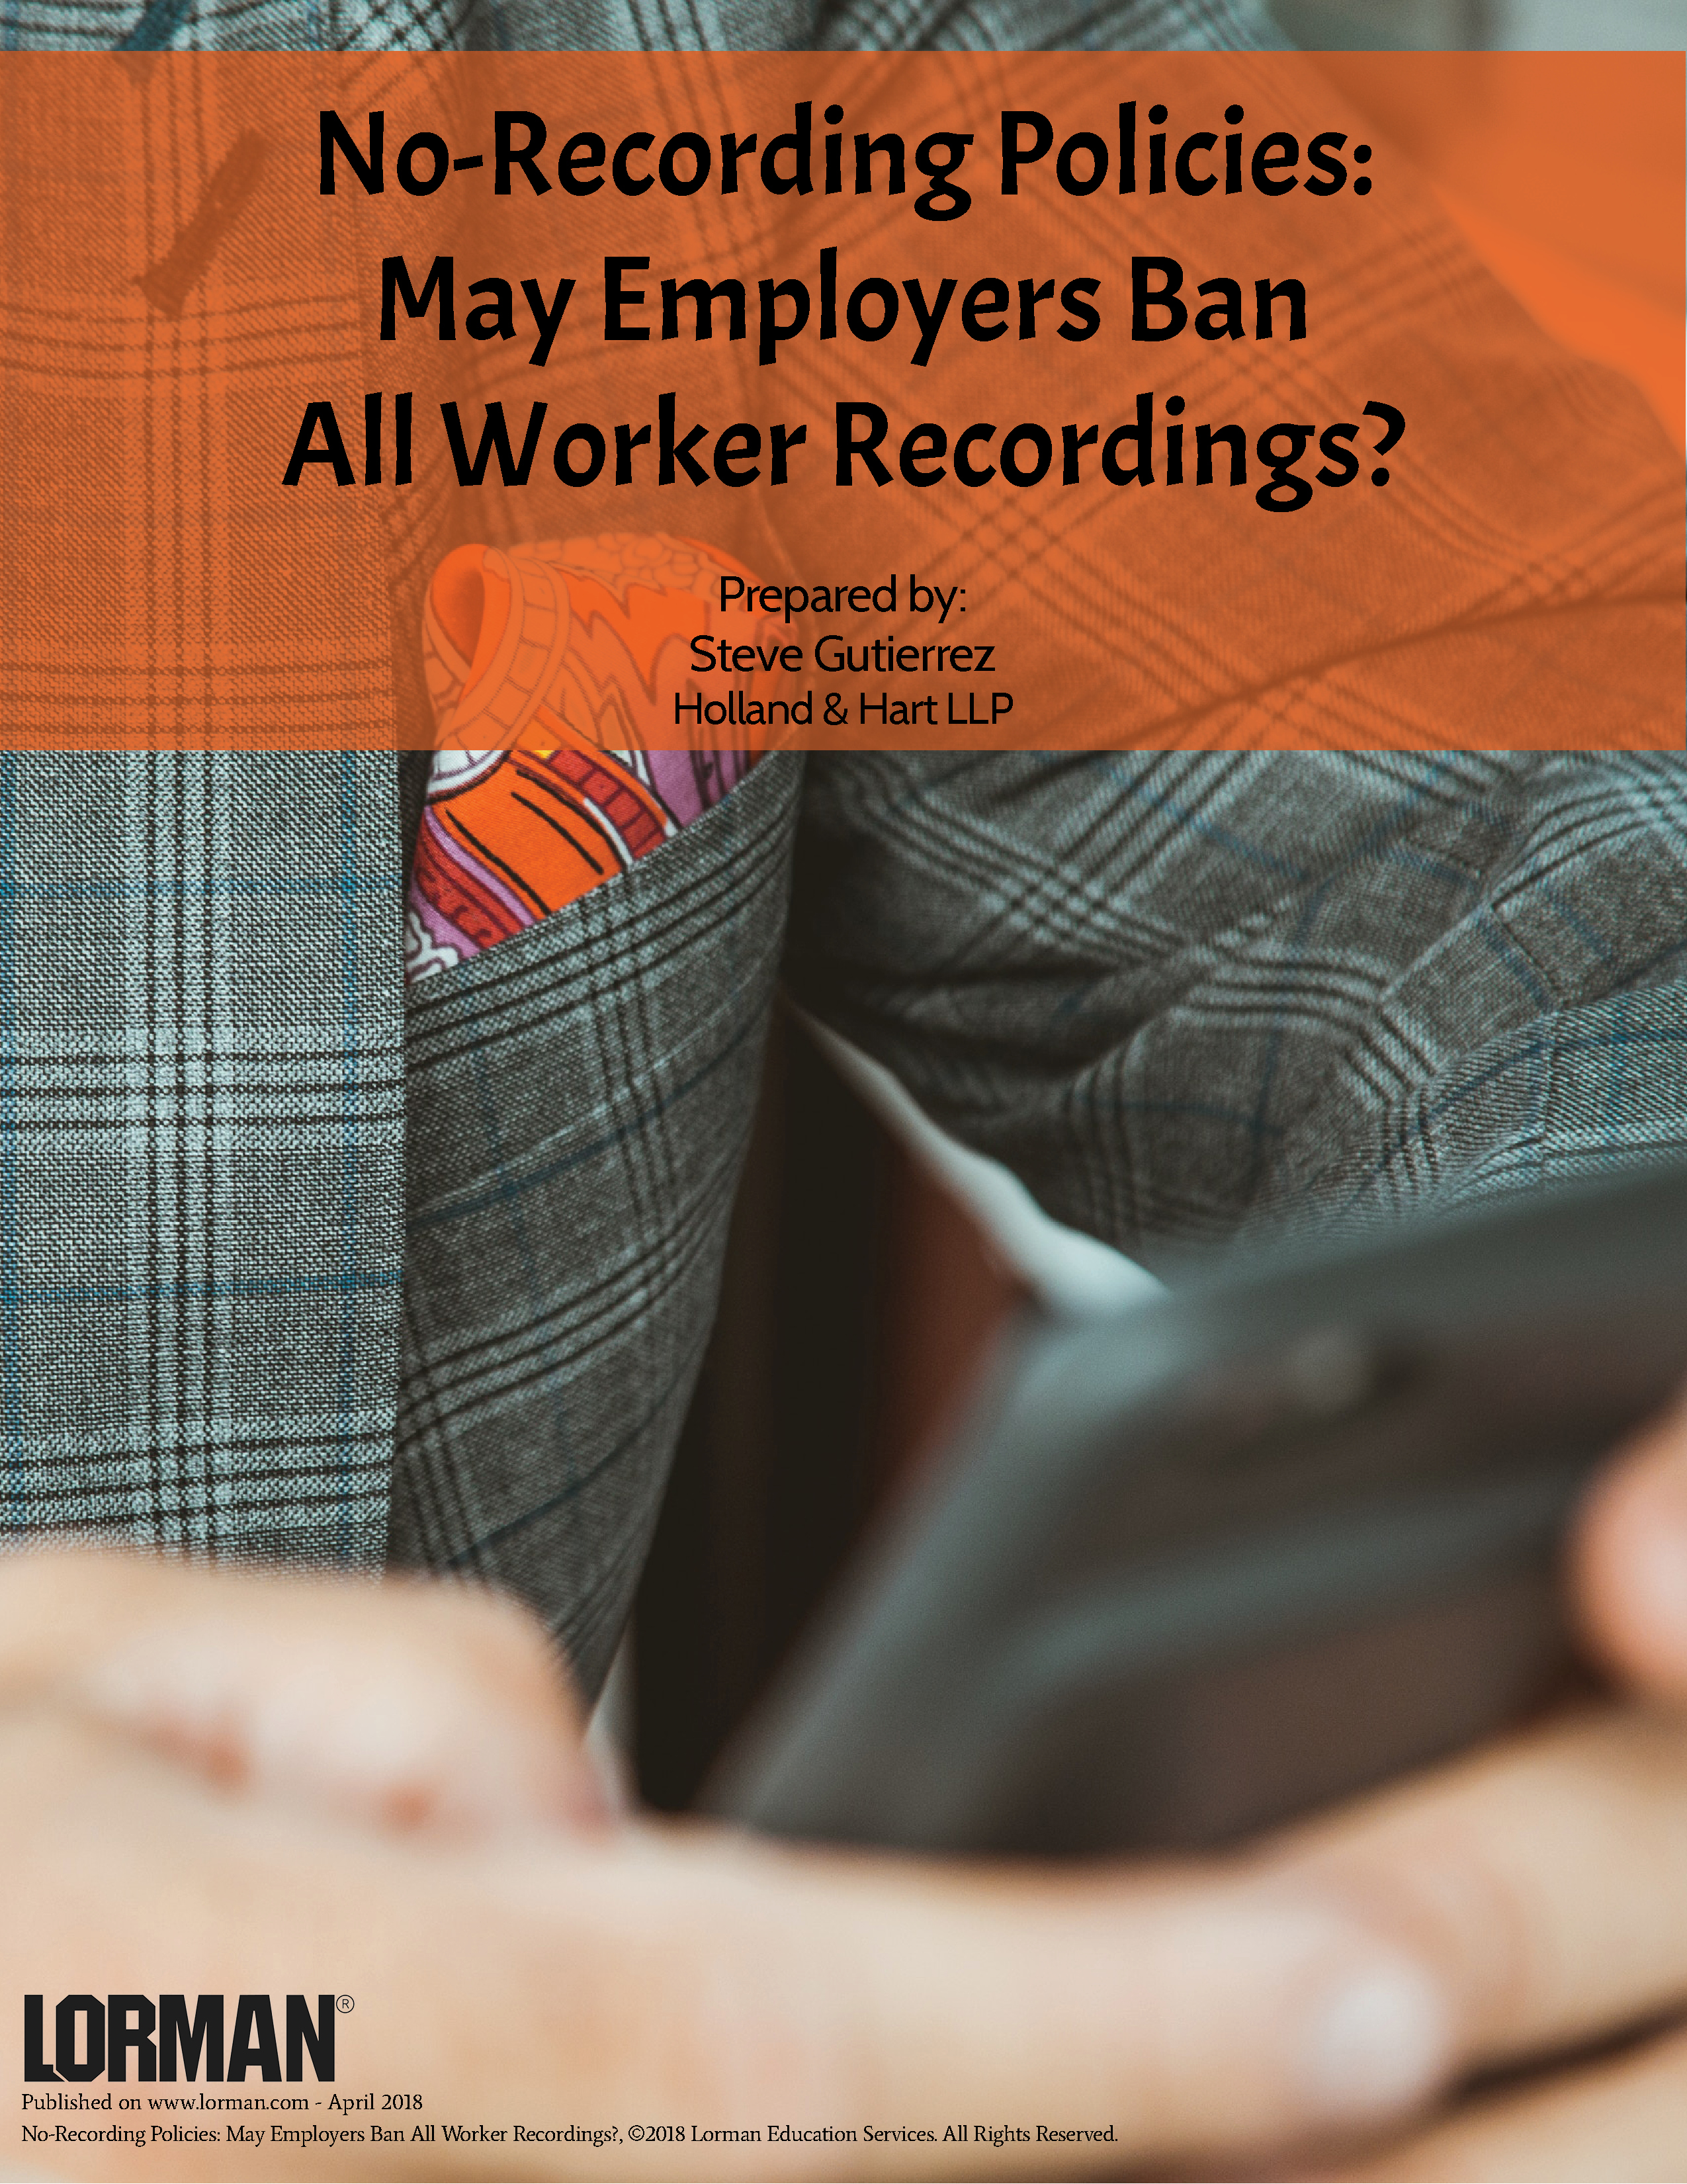 No-Recording Policies: May Employers Ban All Worker Recordings?